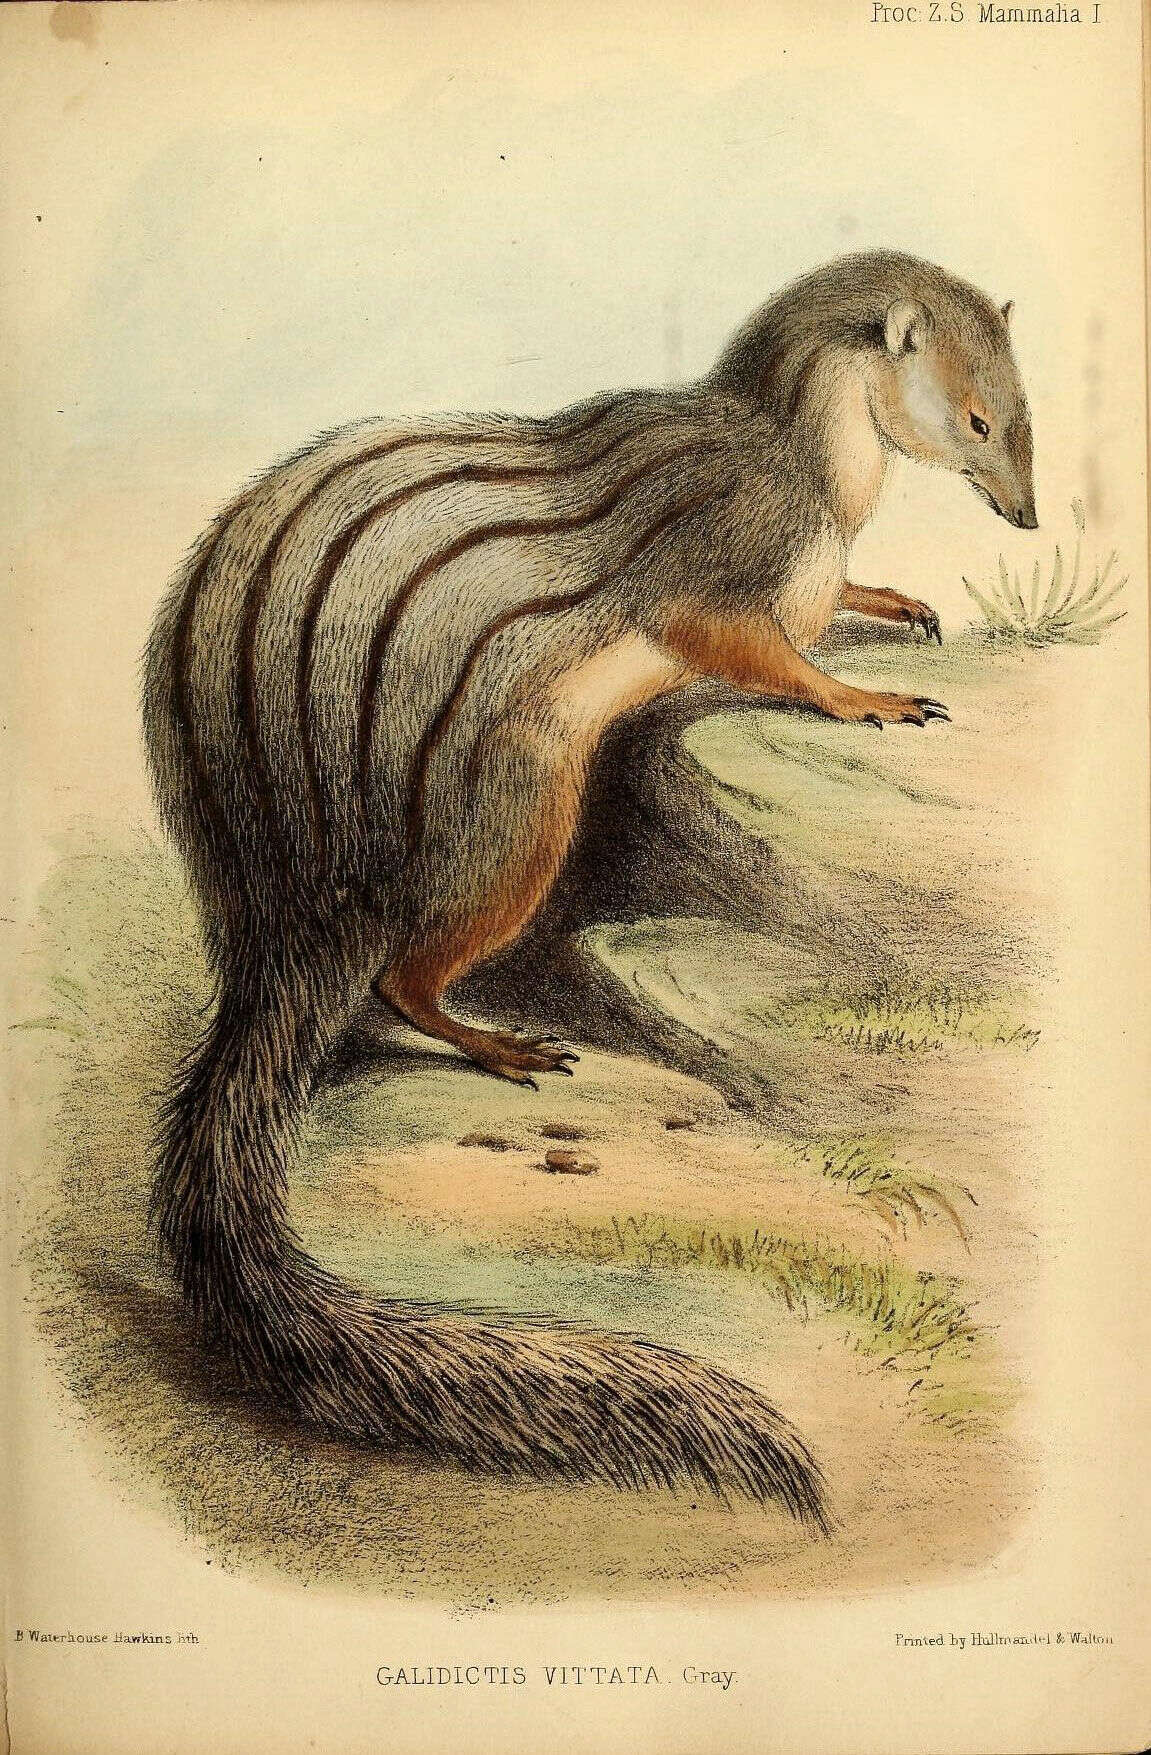 Image of Malagasy carnivores